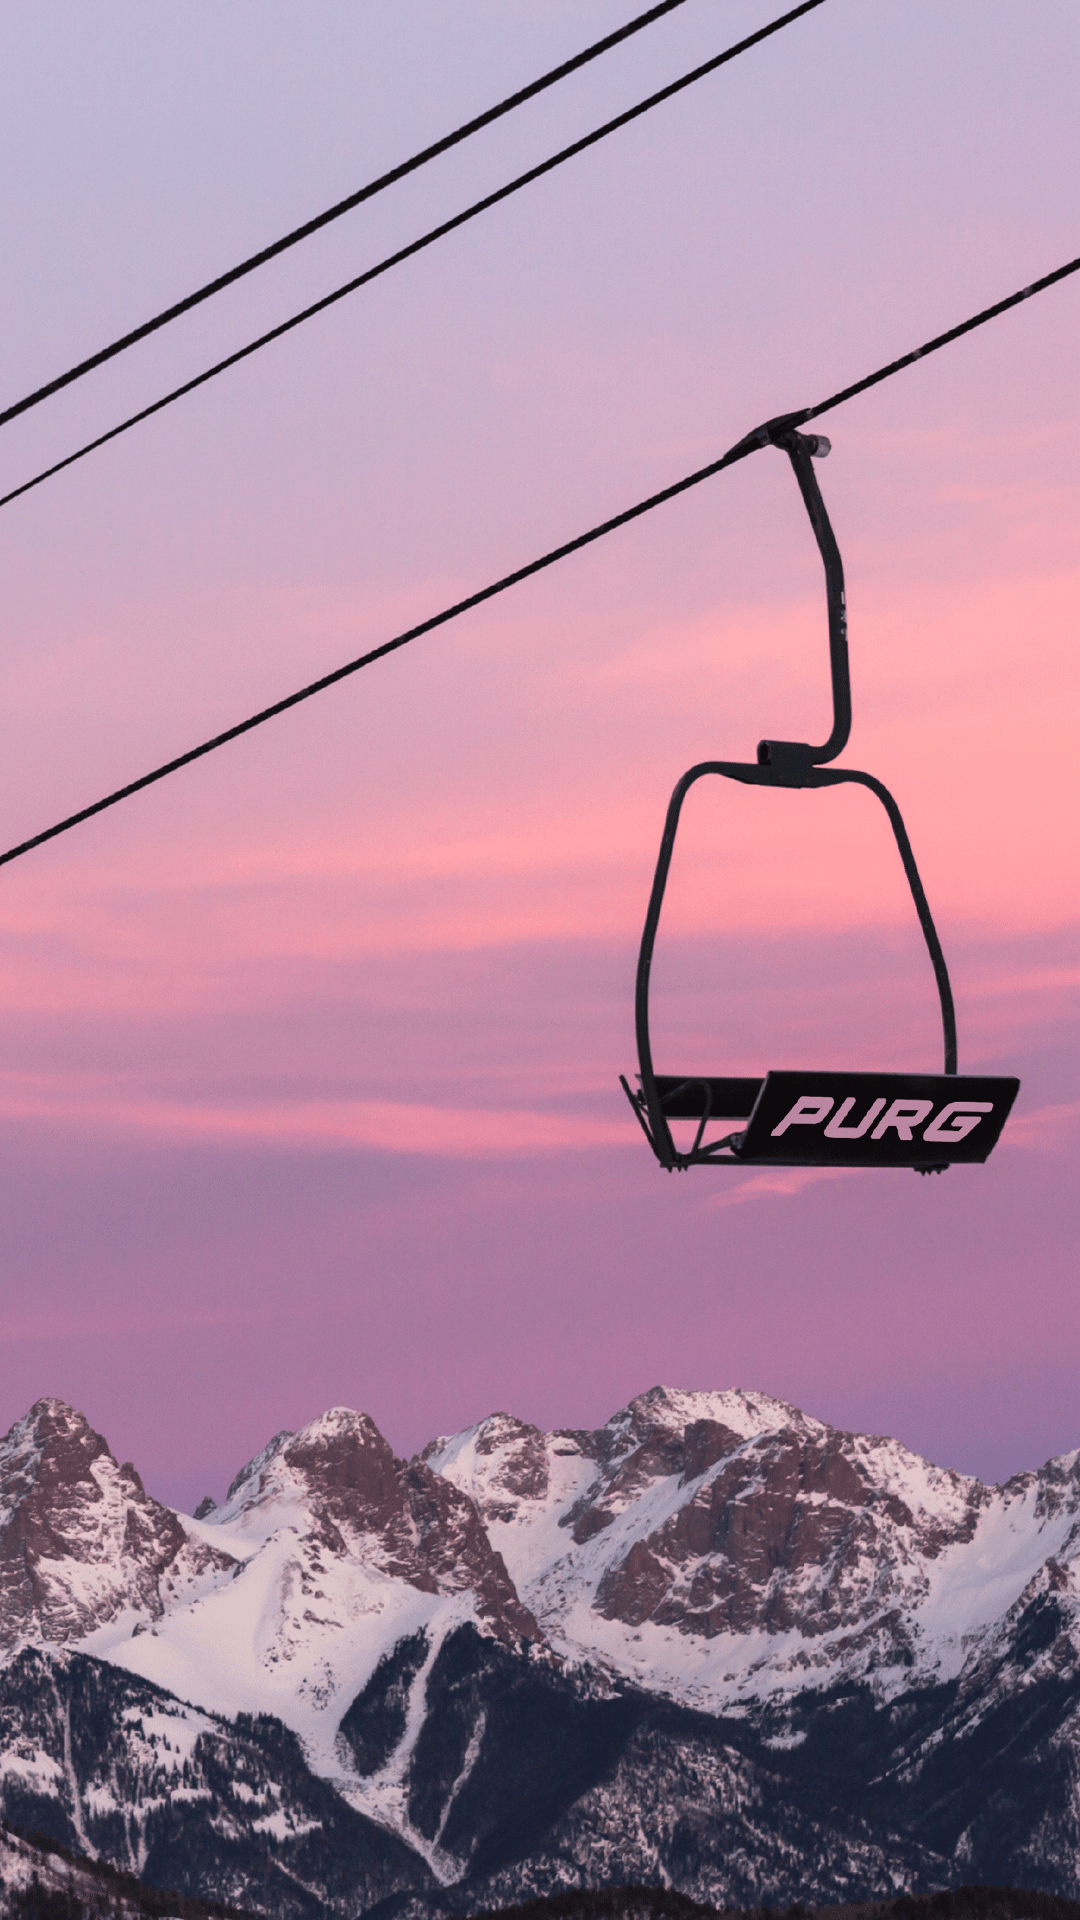 A chairlift hangs against a mountain winter backdrop